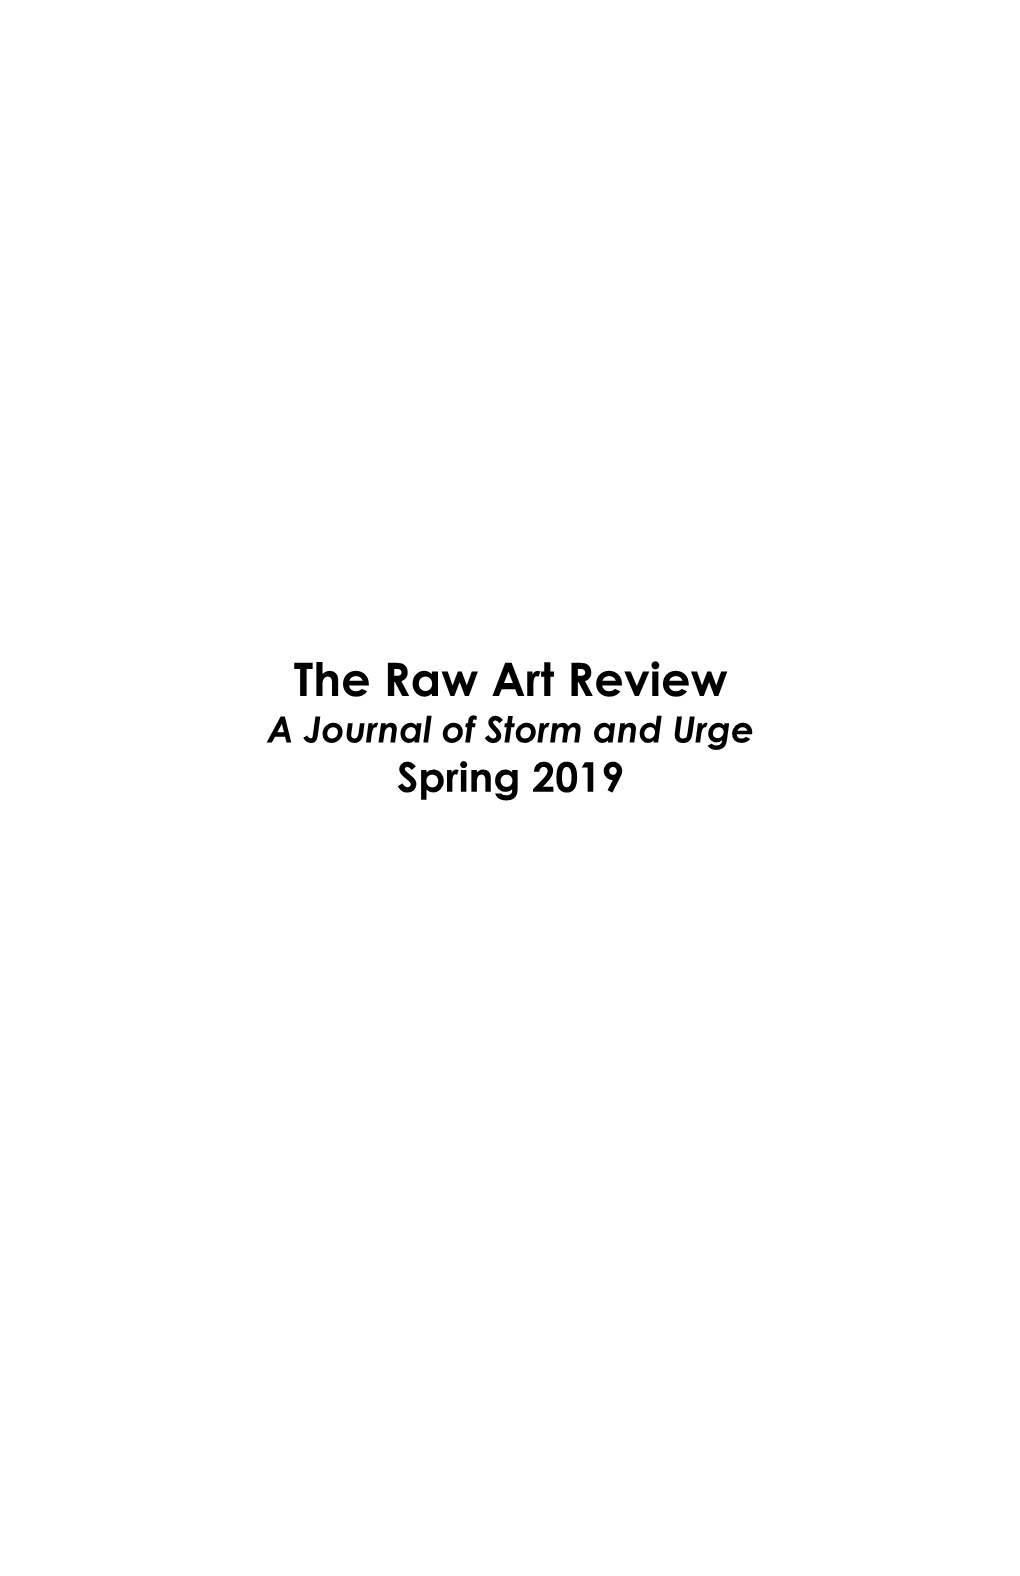 The Raw Art Review a Journal of Storm and Urge Spring 2019